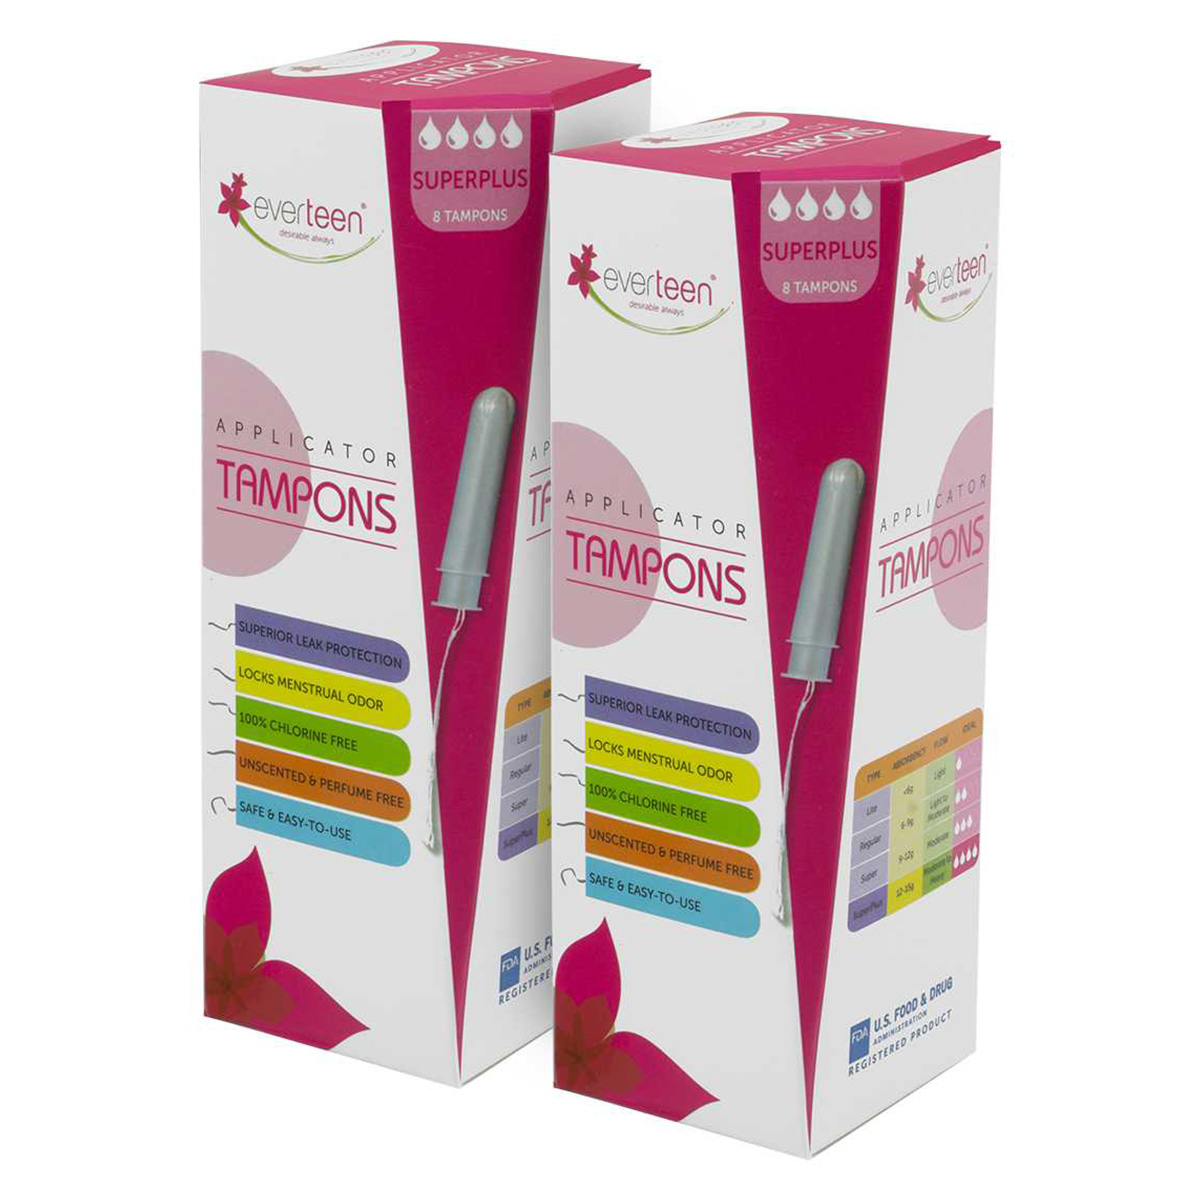 everteen Superplus Applicator Tampons For Periods In Women - Pack of 2, 8 Tampons Each